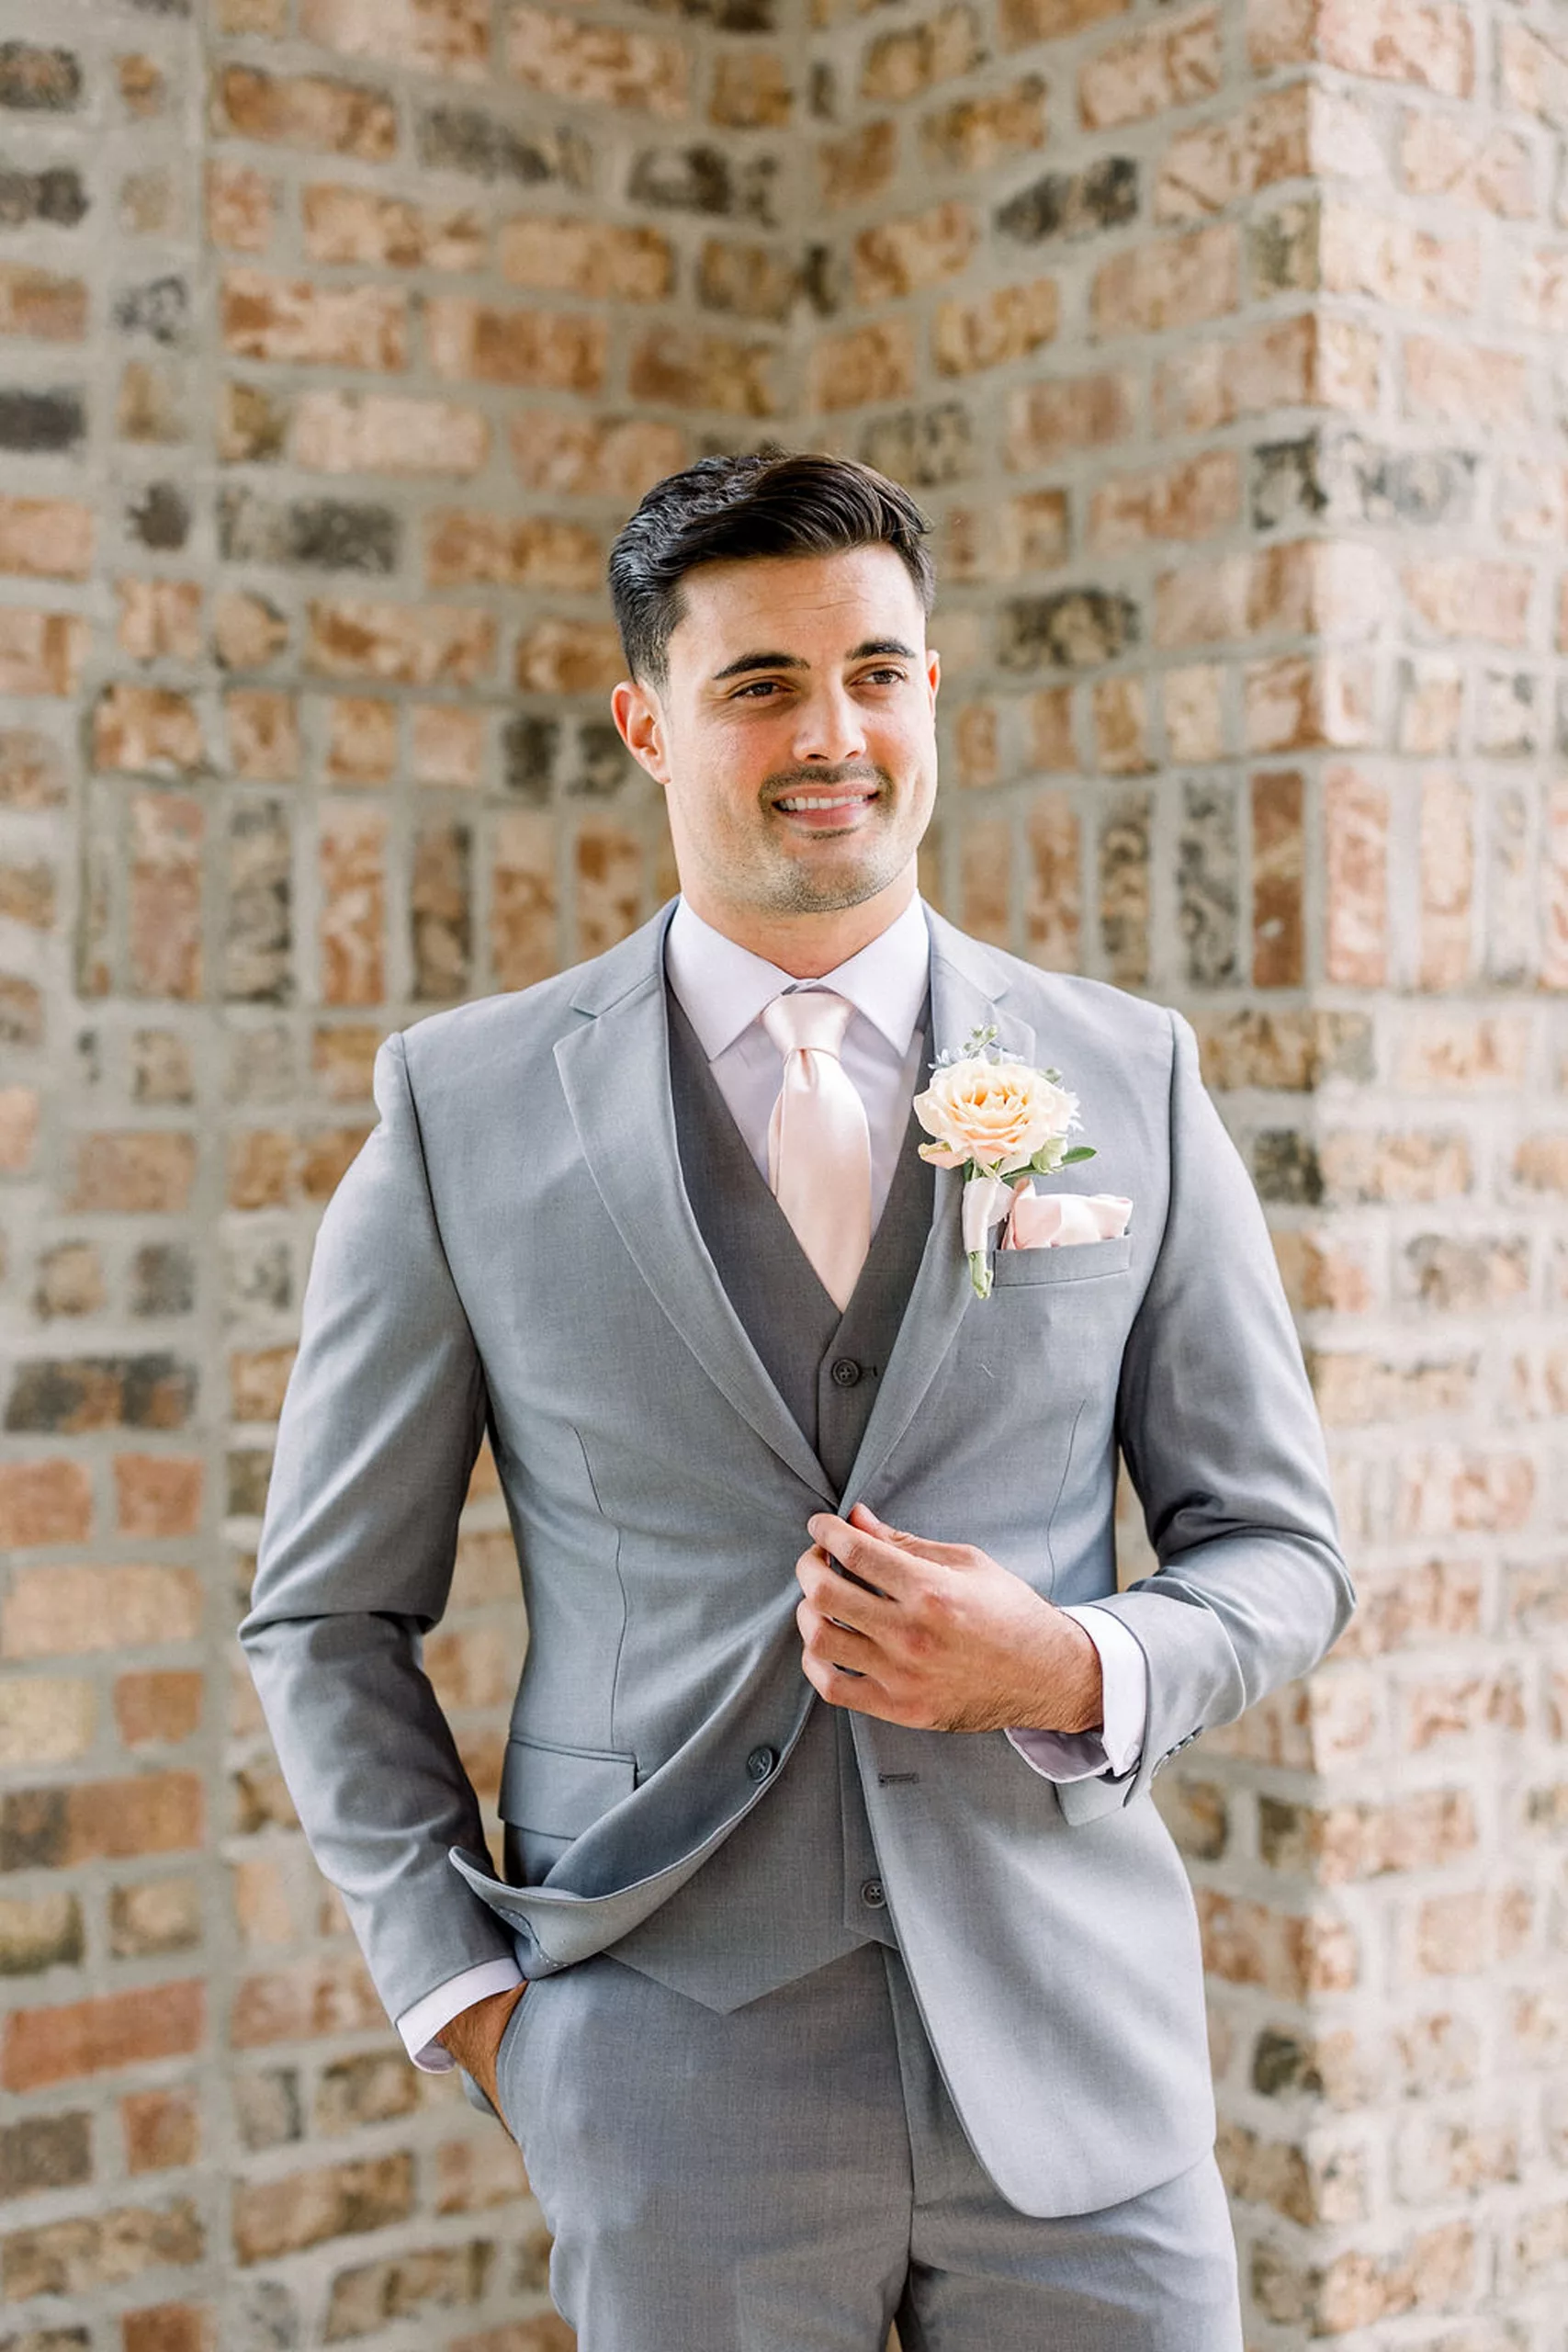 A groom in a grey suit and pink tie stands in a patio buttoning his suit jacket